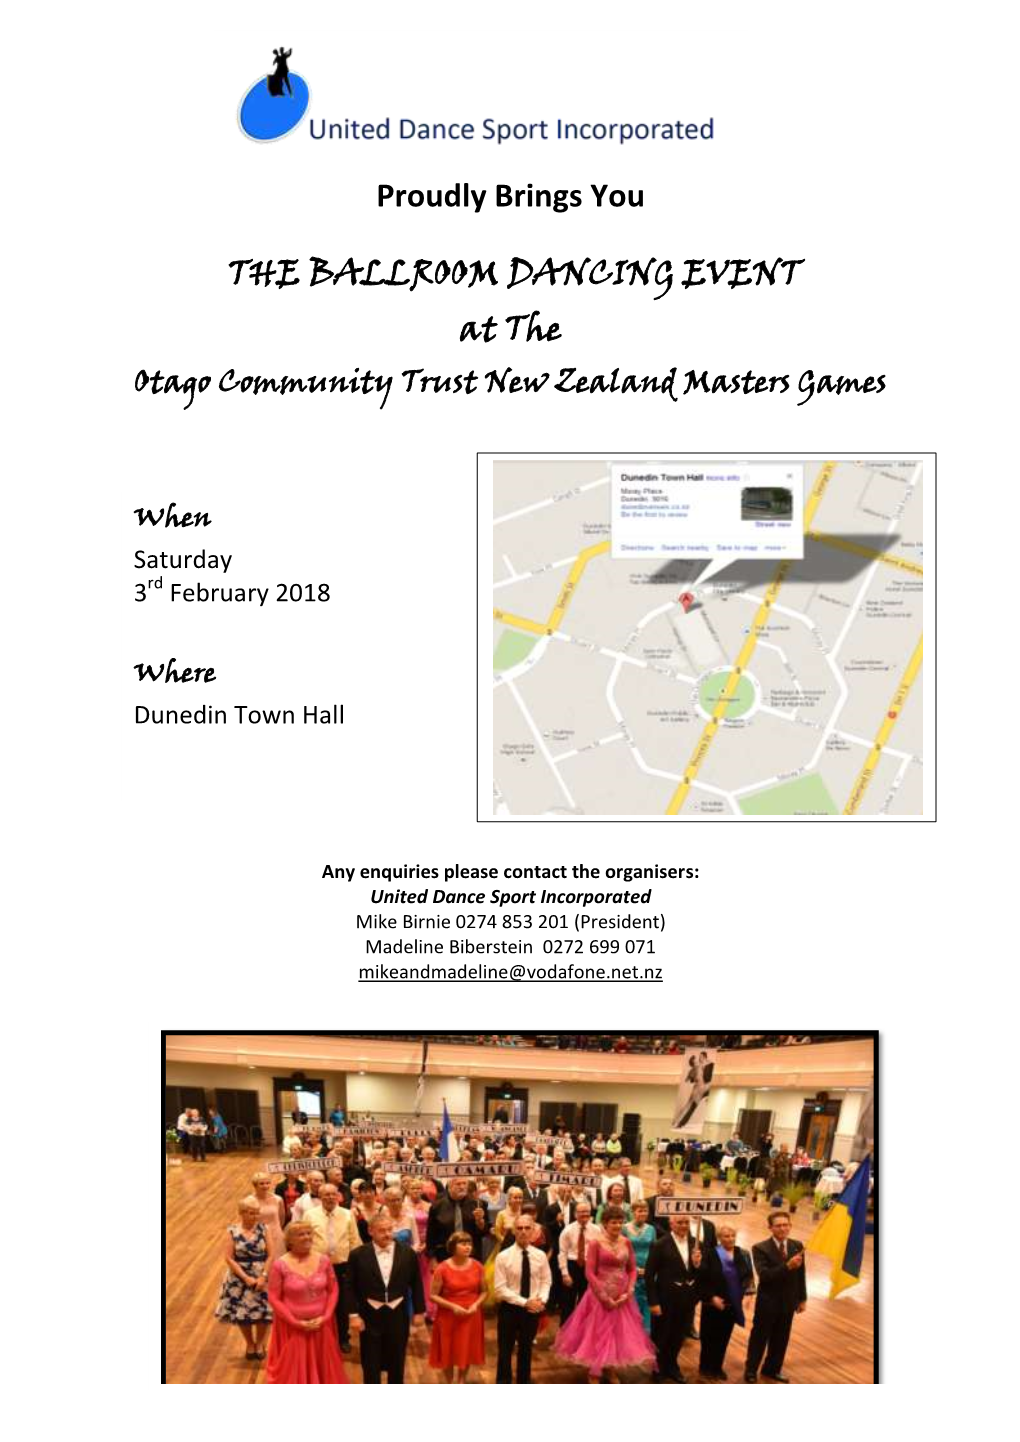 Proudly Brings You the BALLROOM DANCING EVENT At